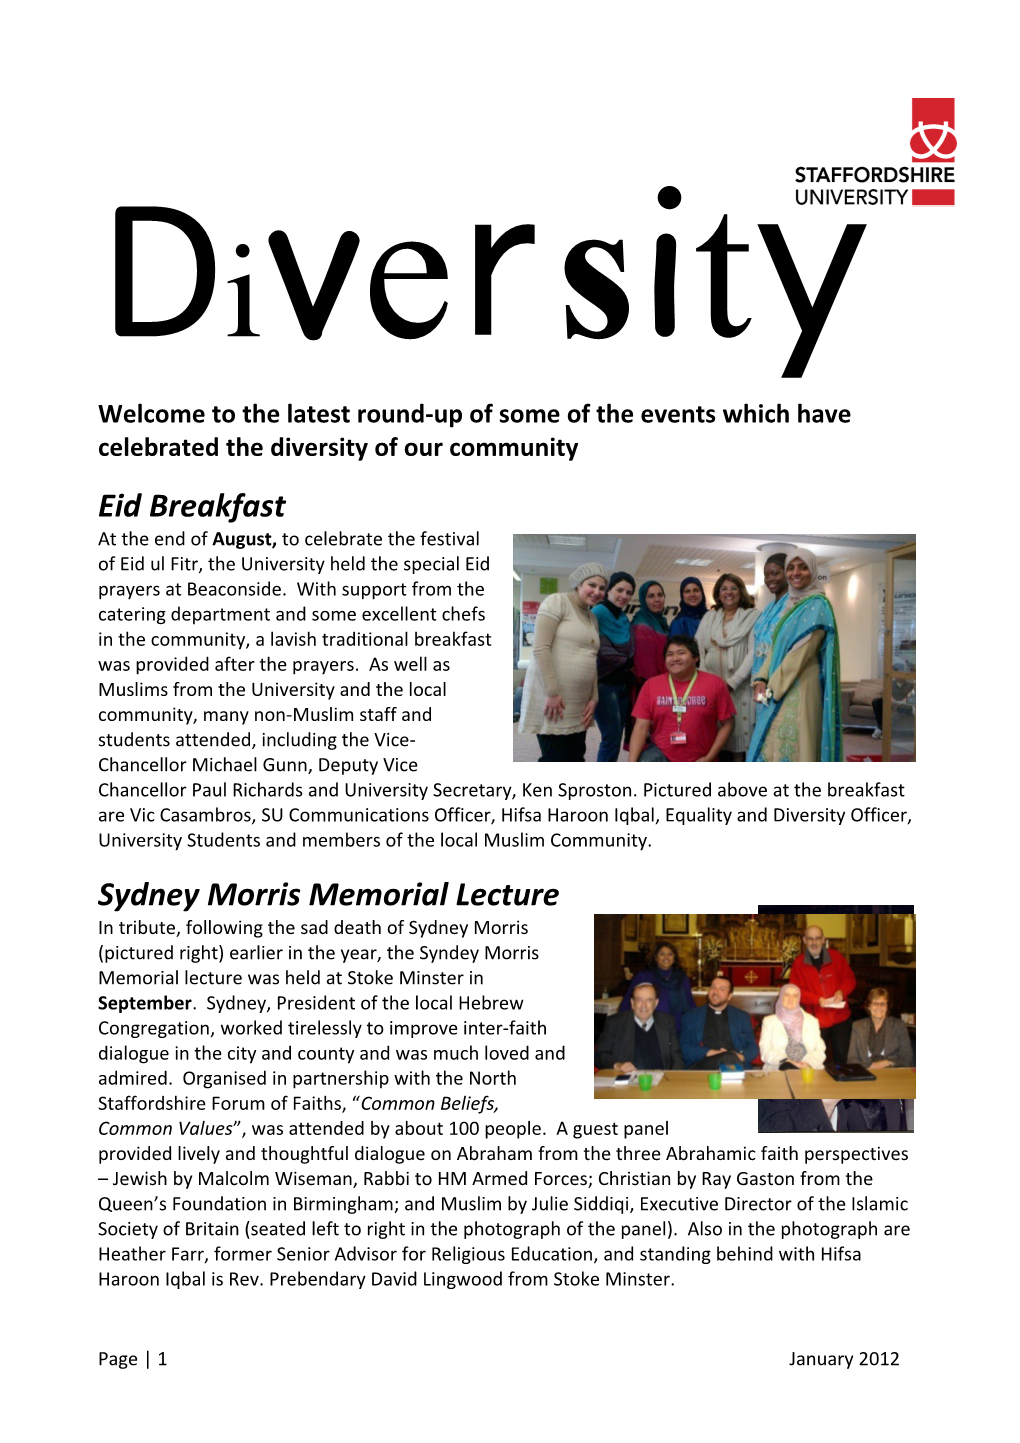 Welcome to the Latest Round-Up of Some of the Events Which Have Celebrated the Diversity